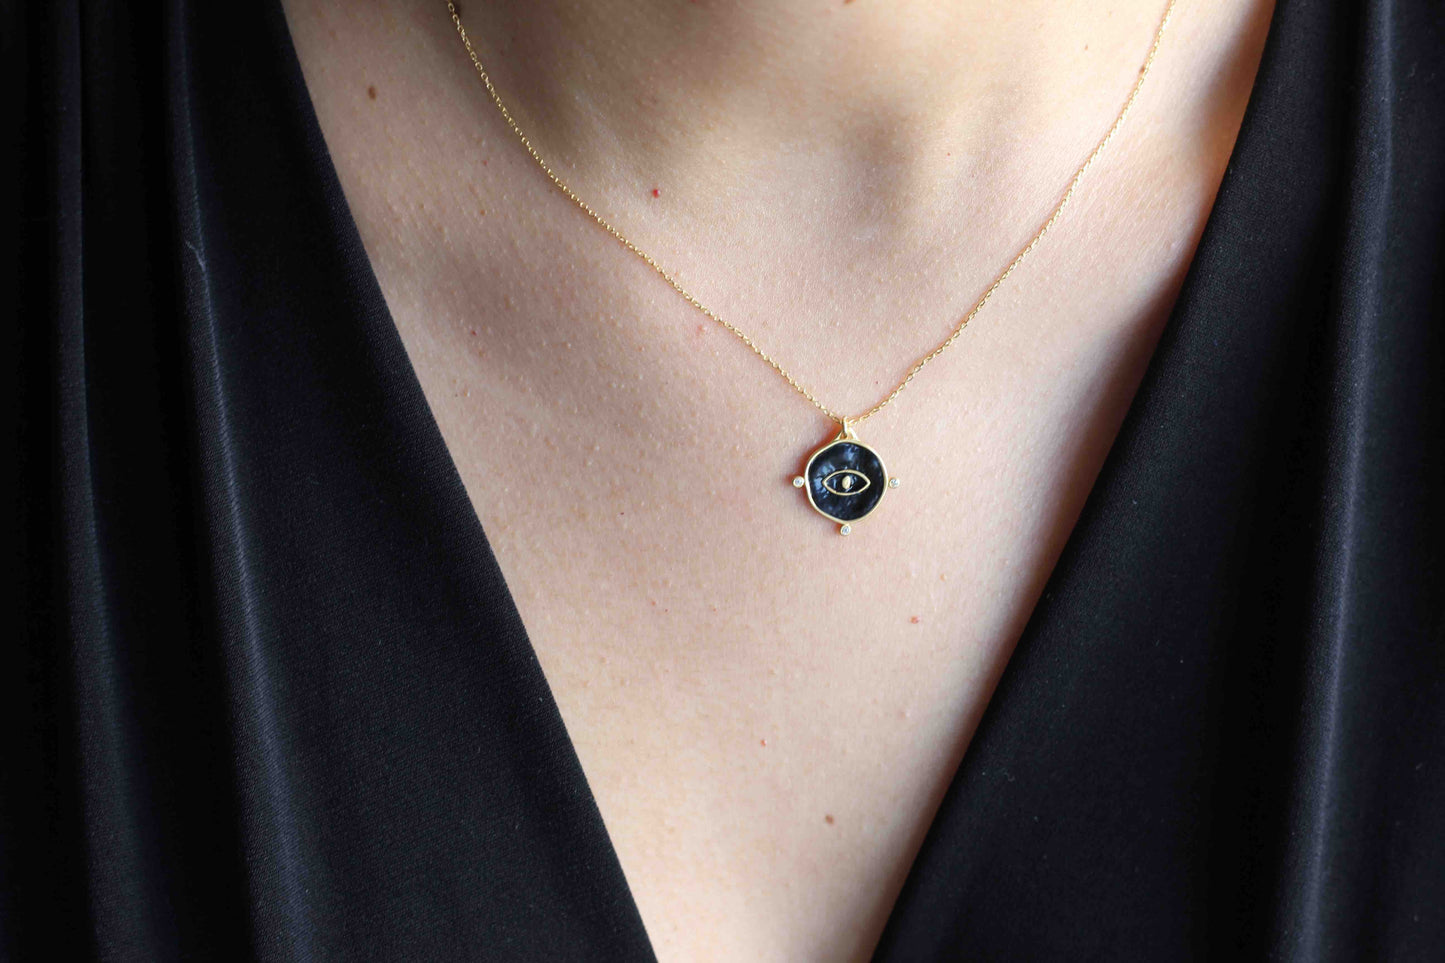 This gorgeous minimal gold evil eye necklace are made with 18k Gold Plated on solid 925 sterling silver and has 3 mini cubic zirconias around the charm. 